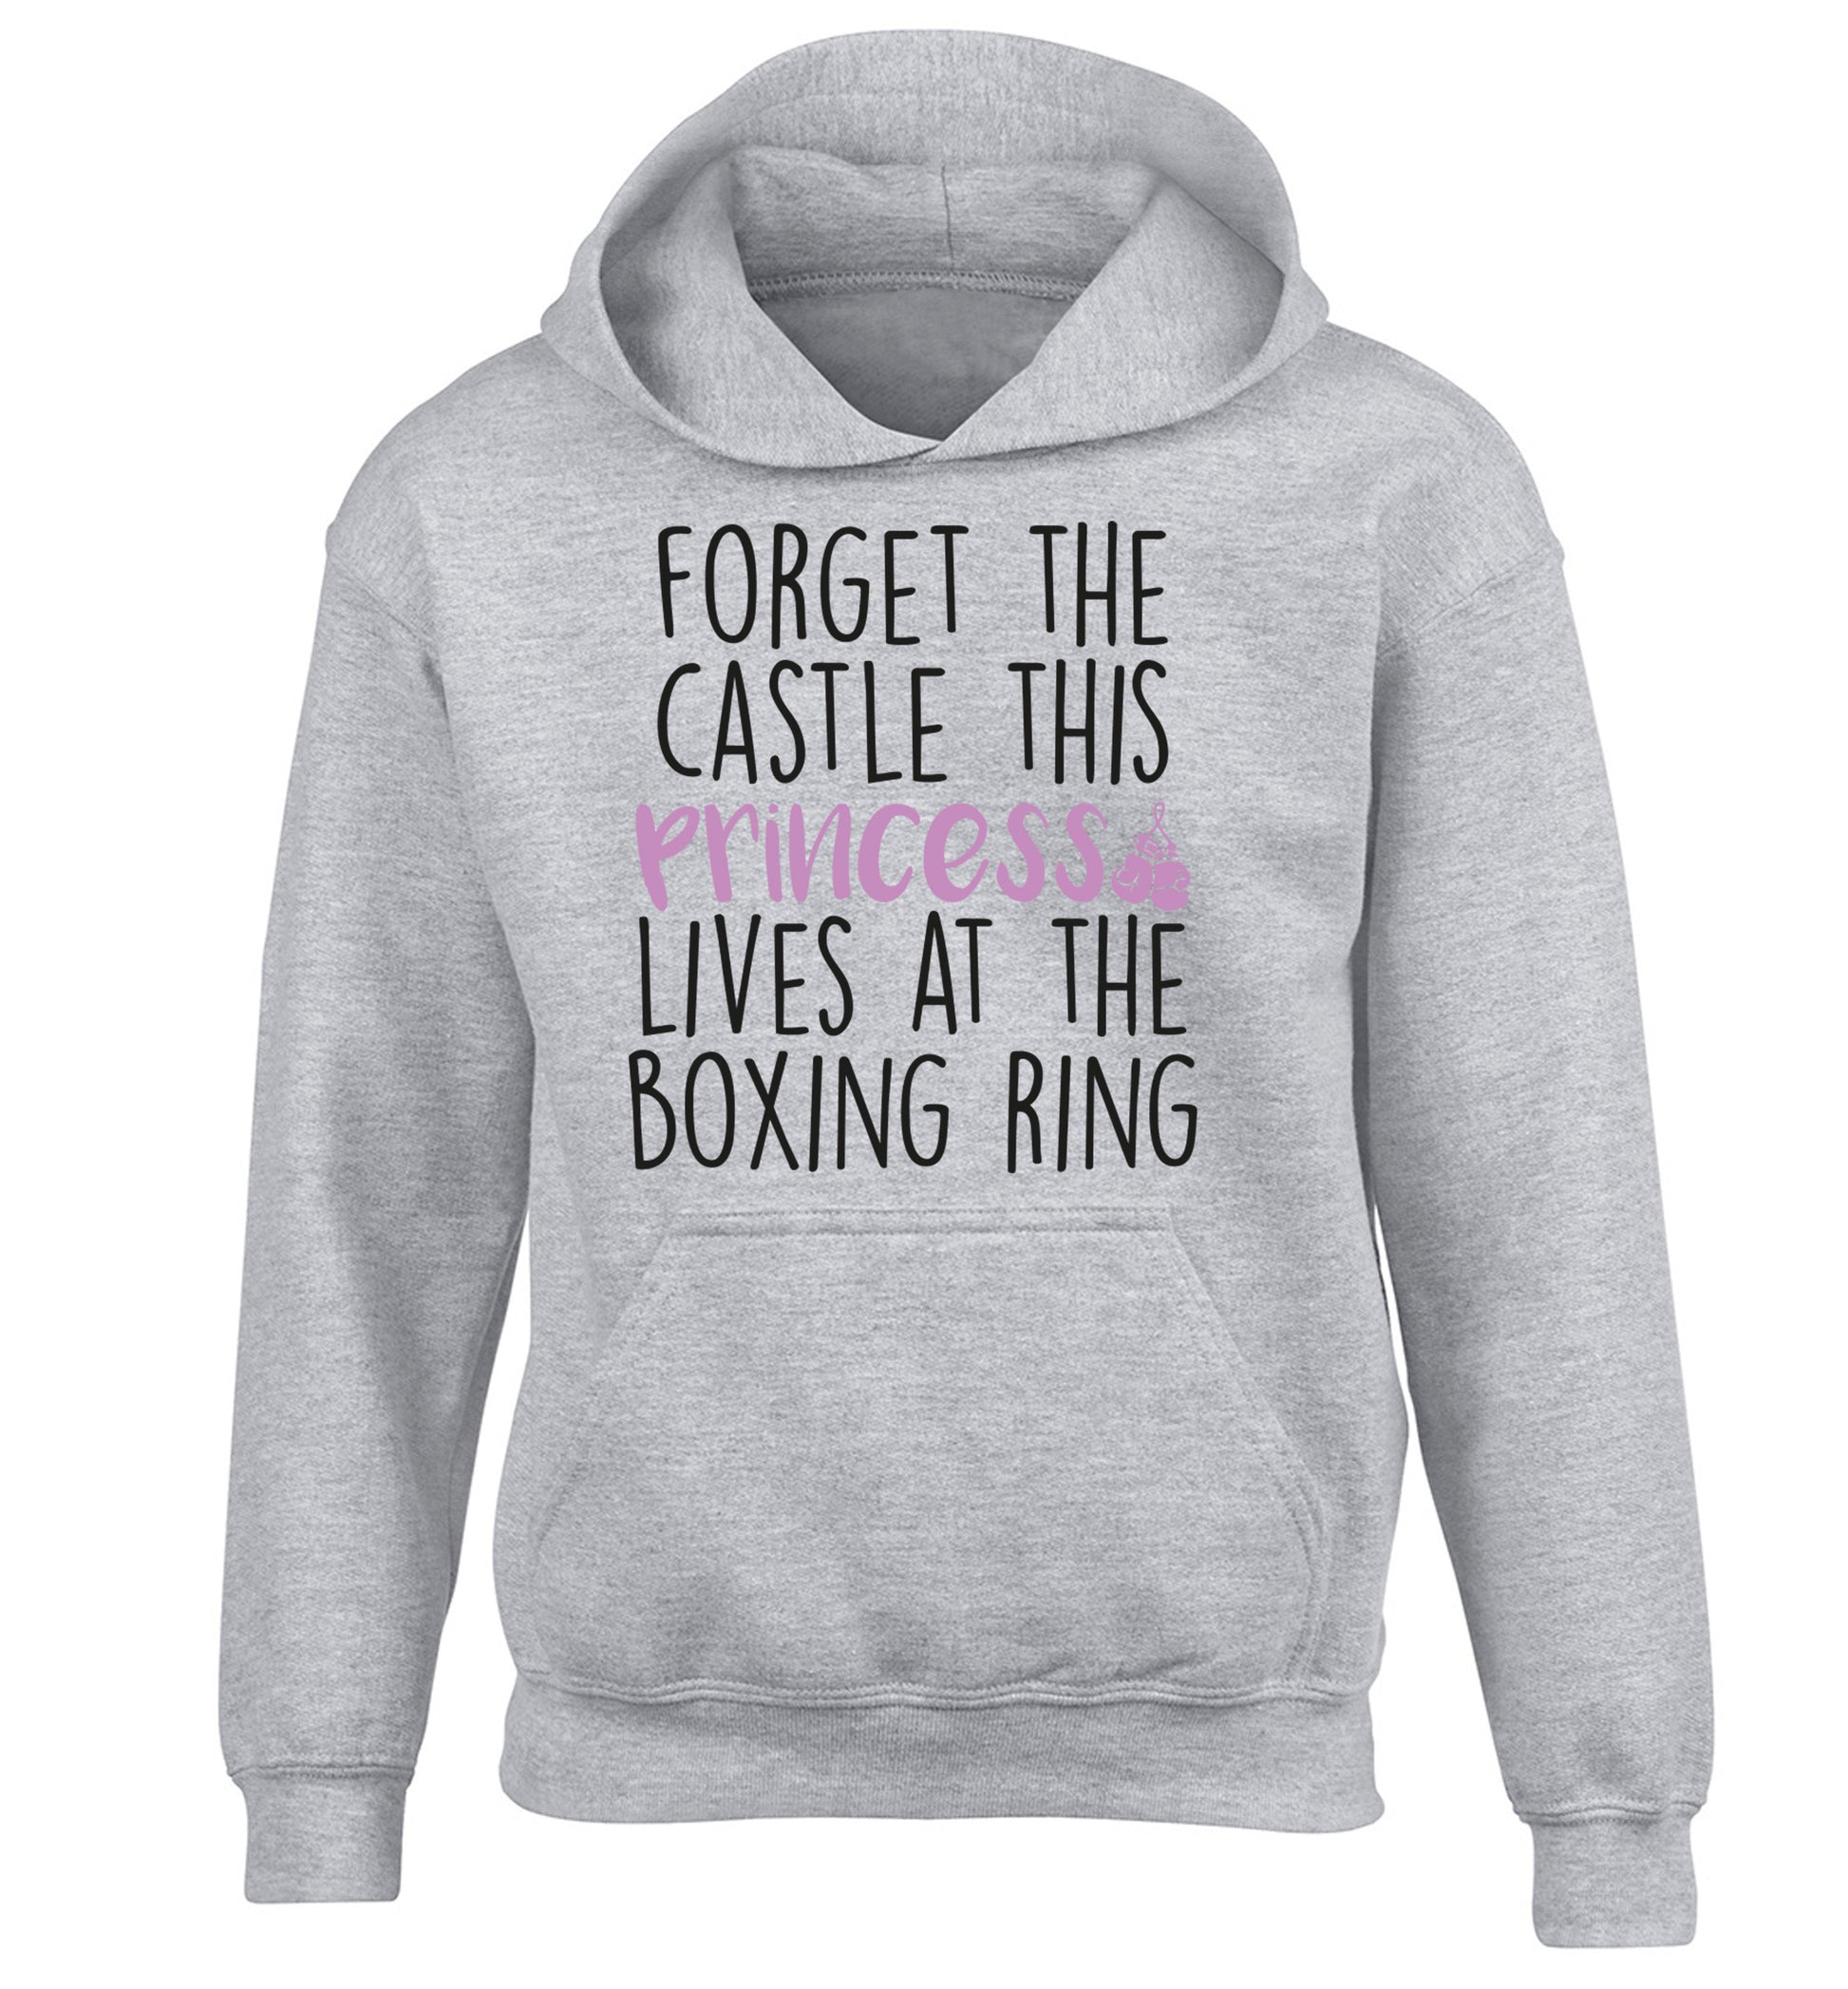 Forget the castle this princess lives at the boxing ring children's grey hoodie 12-14 Years